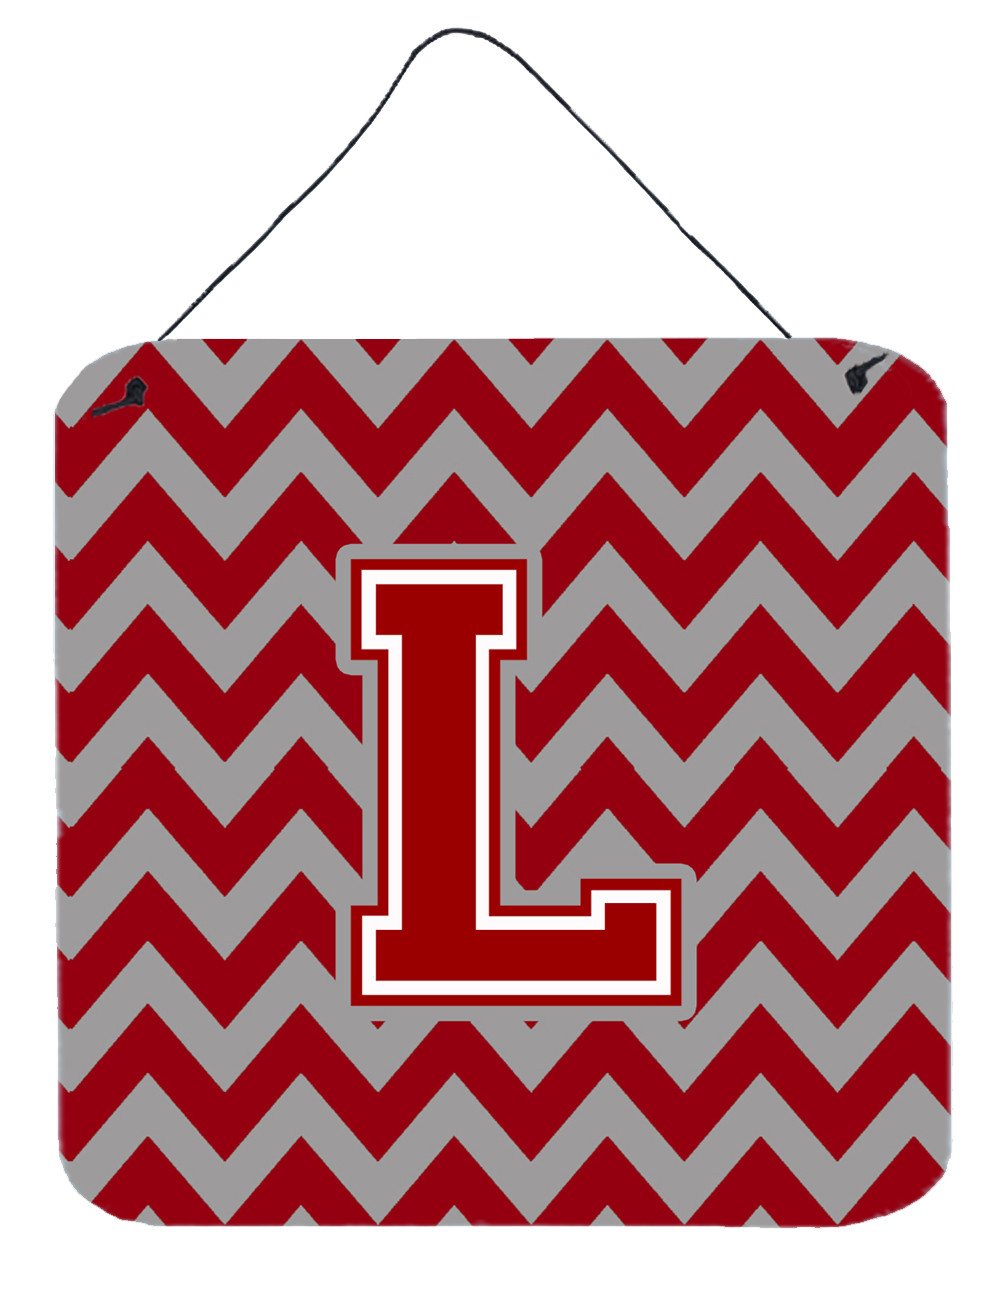 Letter L Chevron Maroon and White Wall or Door Hanging Prints CJ1049-LDS66 by Caroline's Treasures